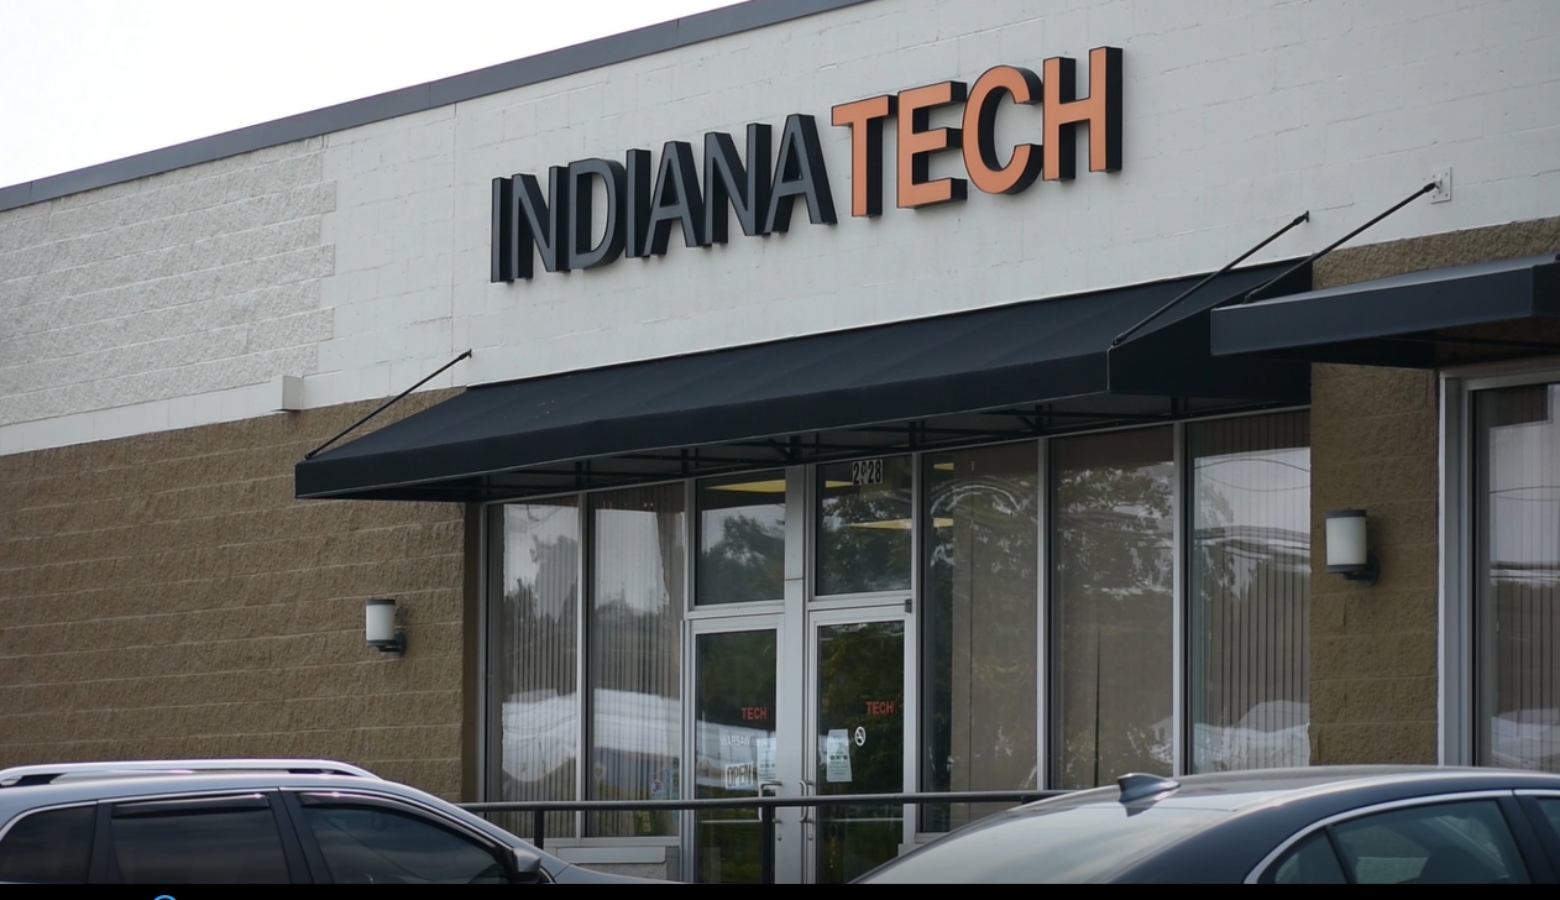 An Indiana Tech satellite campus in Warsaw, Indiana where students can enroll and take online classes. (Justin Hicks / IPB News)